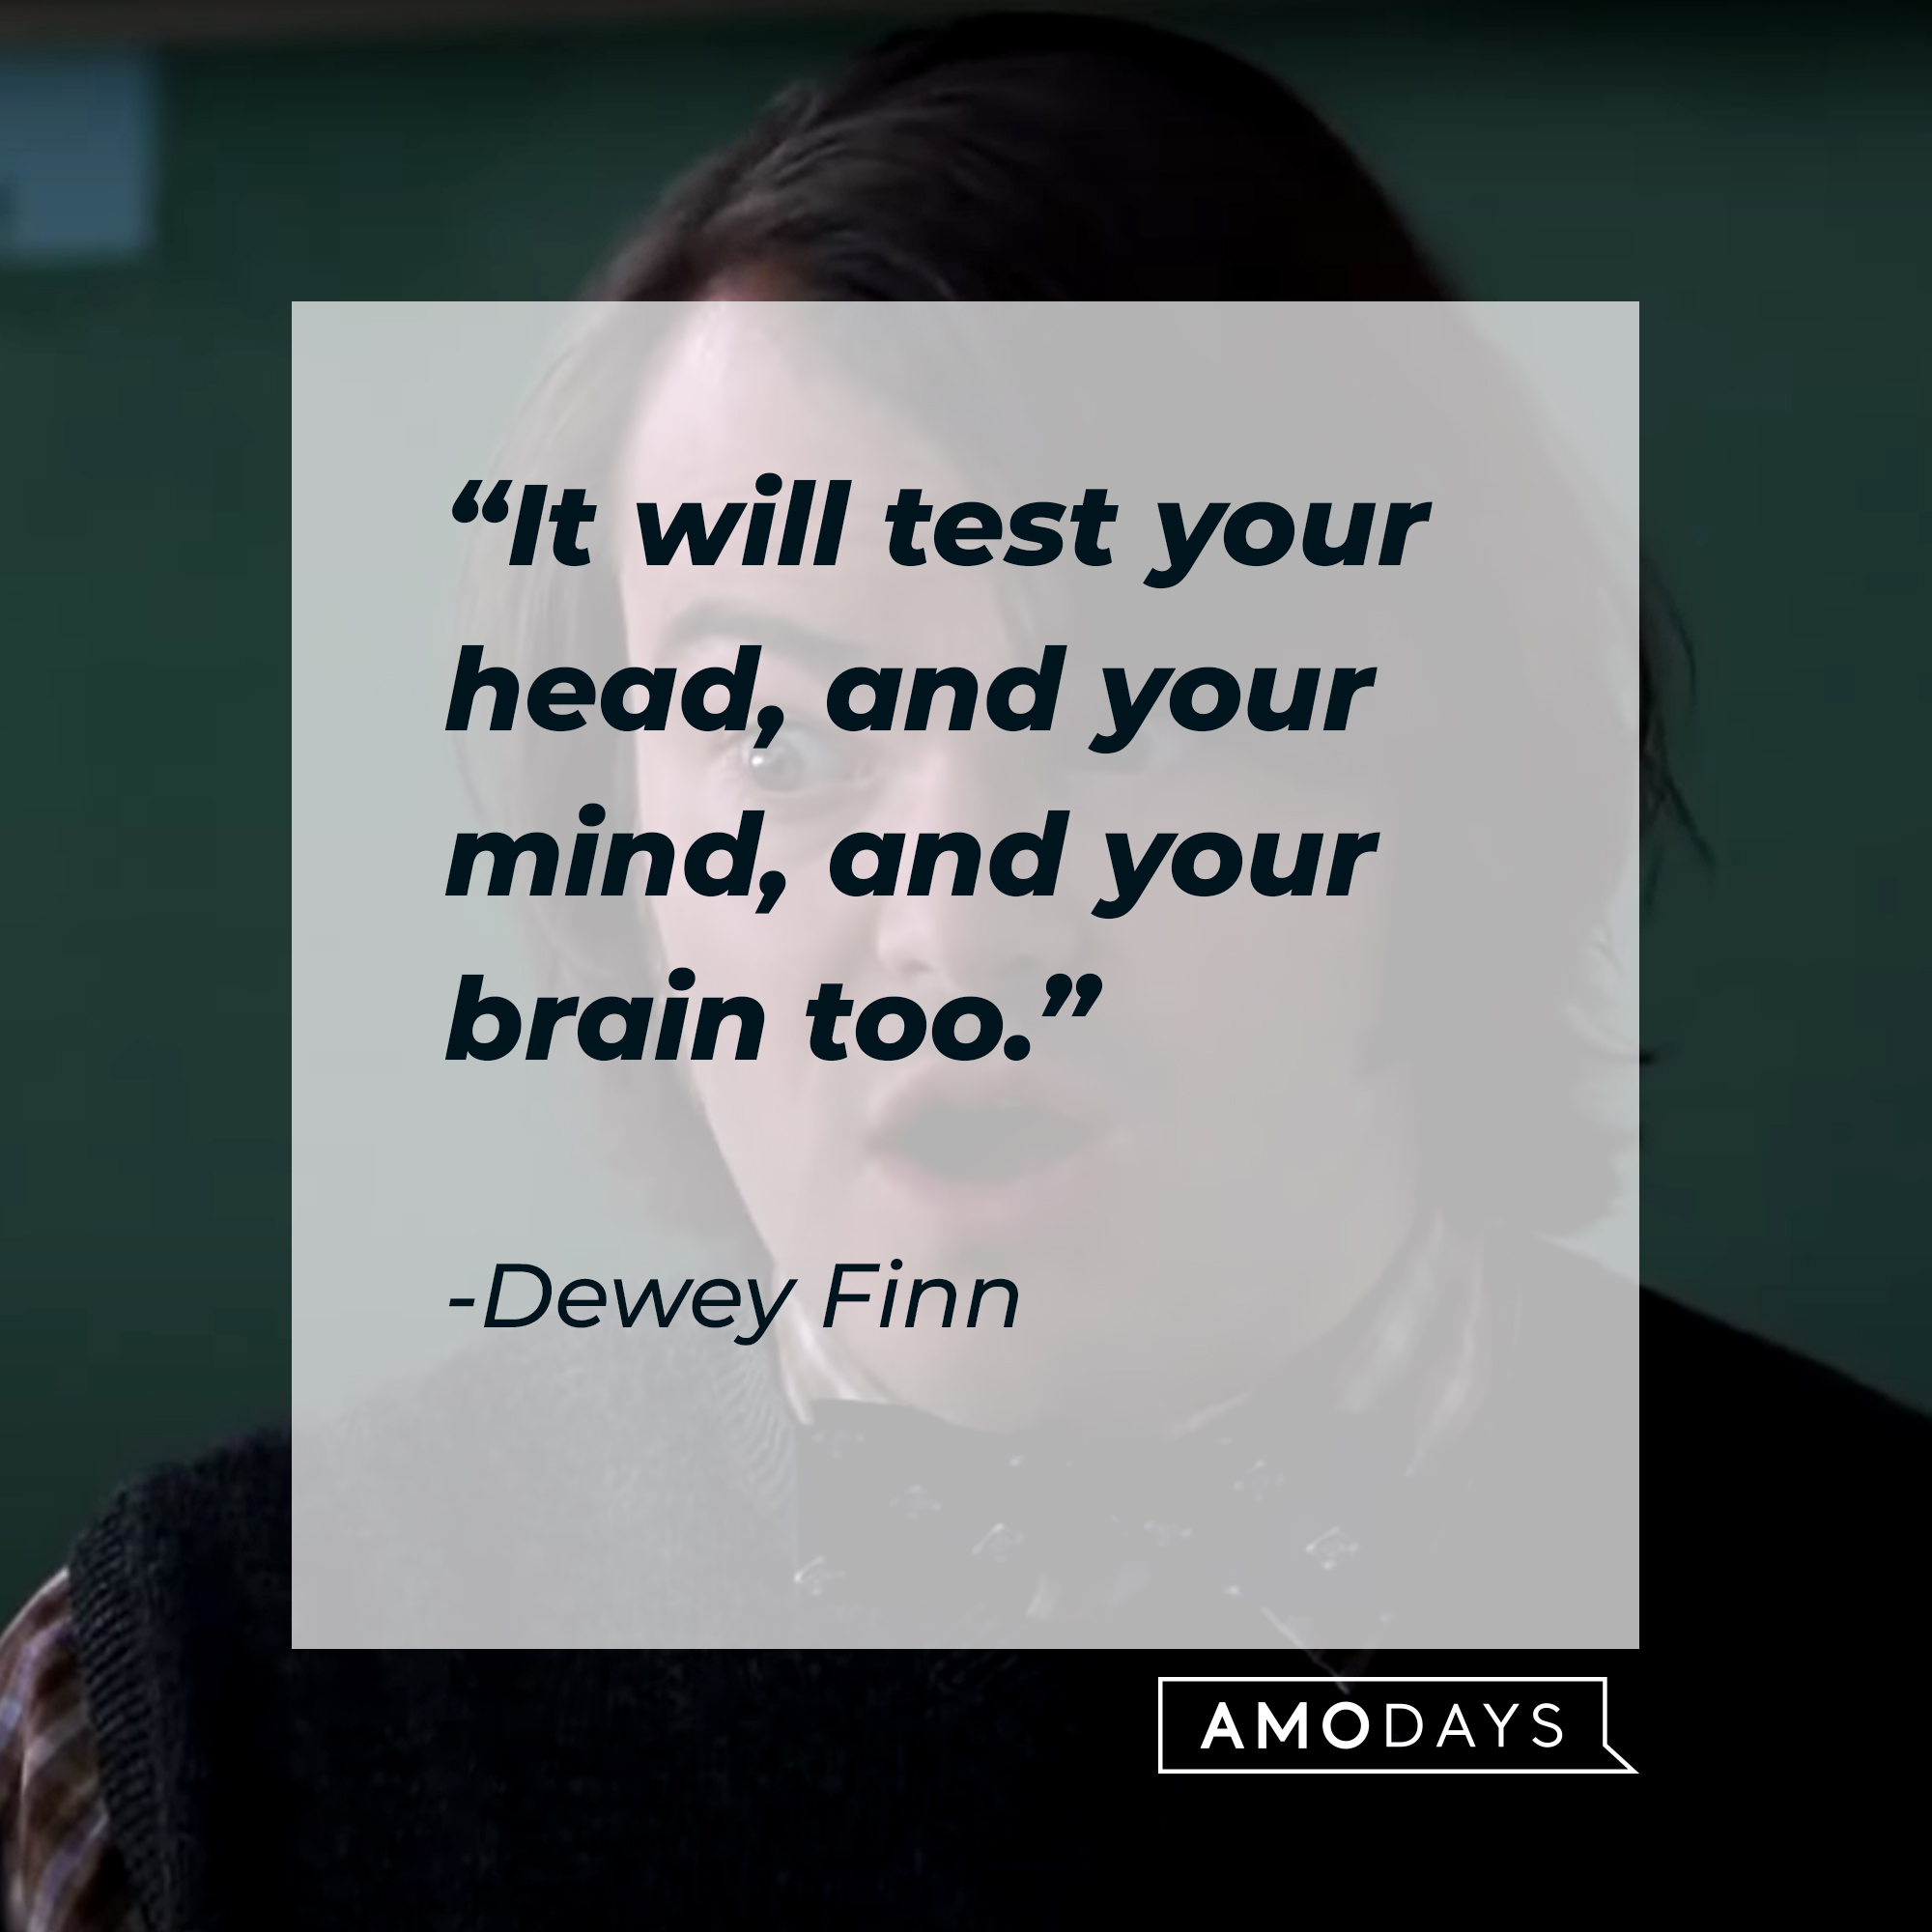 Dewey Finn, with his  quote: “It will test your head, and your mind, and your brain too.” | Source: youtube.com/paramountpictures